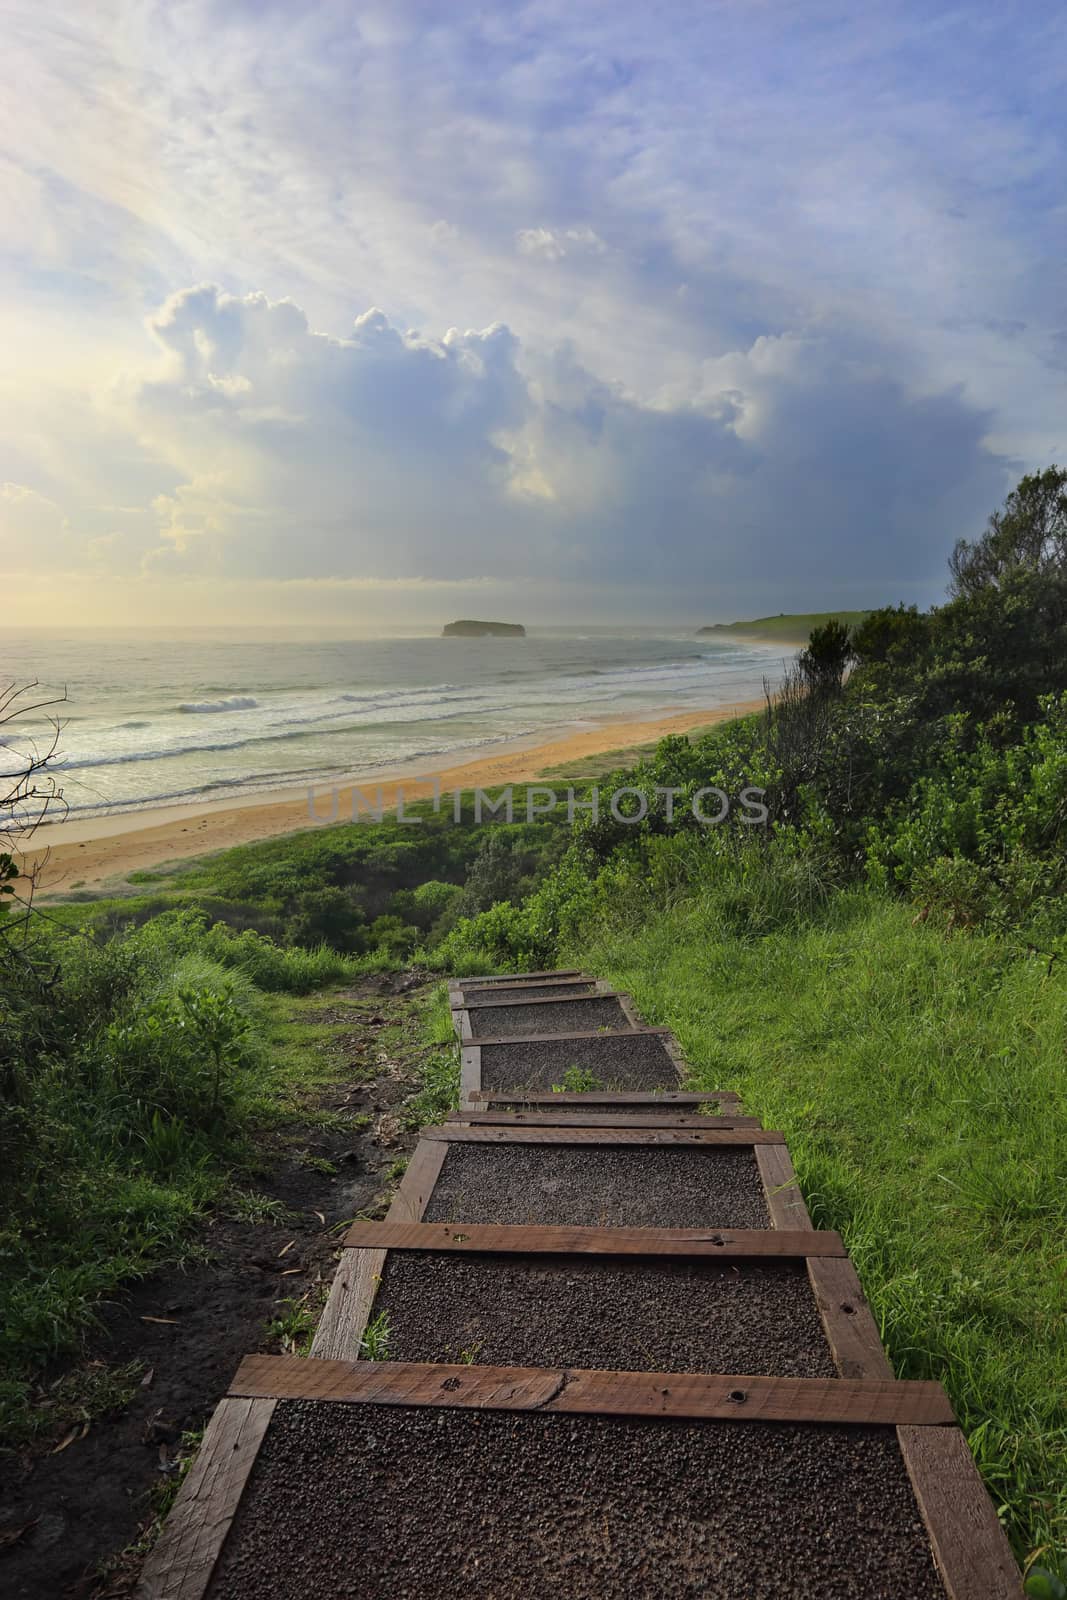 The timber and bitumen  path abruptly ends from the headland at Mystics Beach in Killalea State Park, then you make your own way down through the trees and vegetation.  Misty salt spray, filtered sunlight and breaking surf sure give this beach a mystical feel. Popular with surfers.